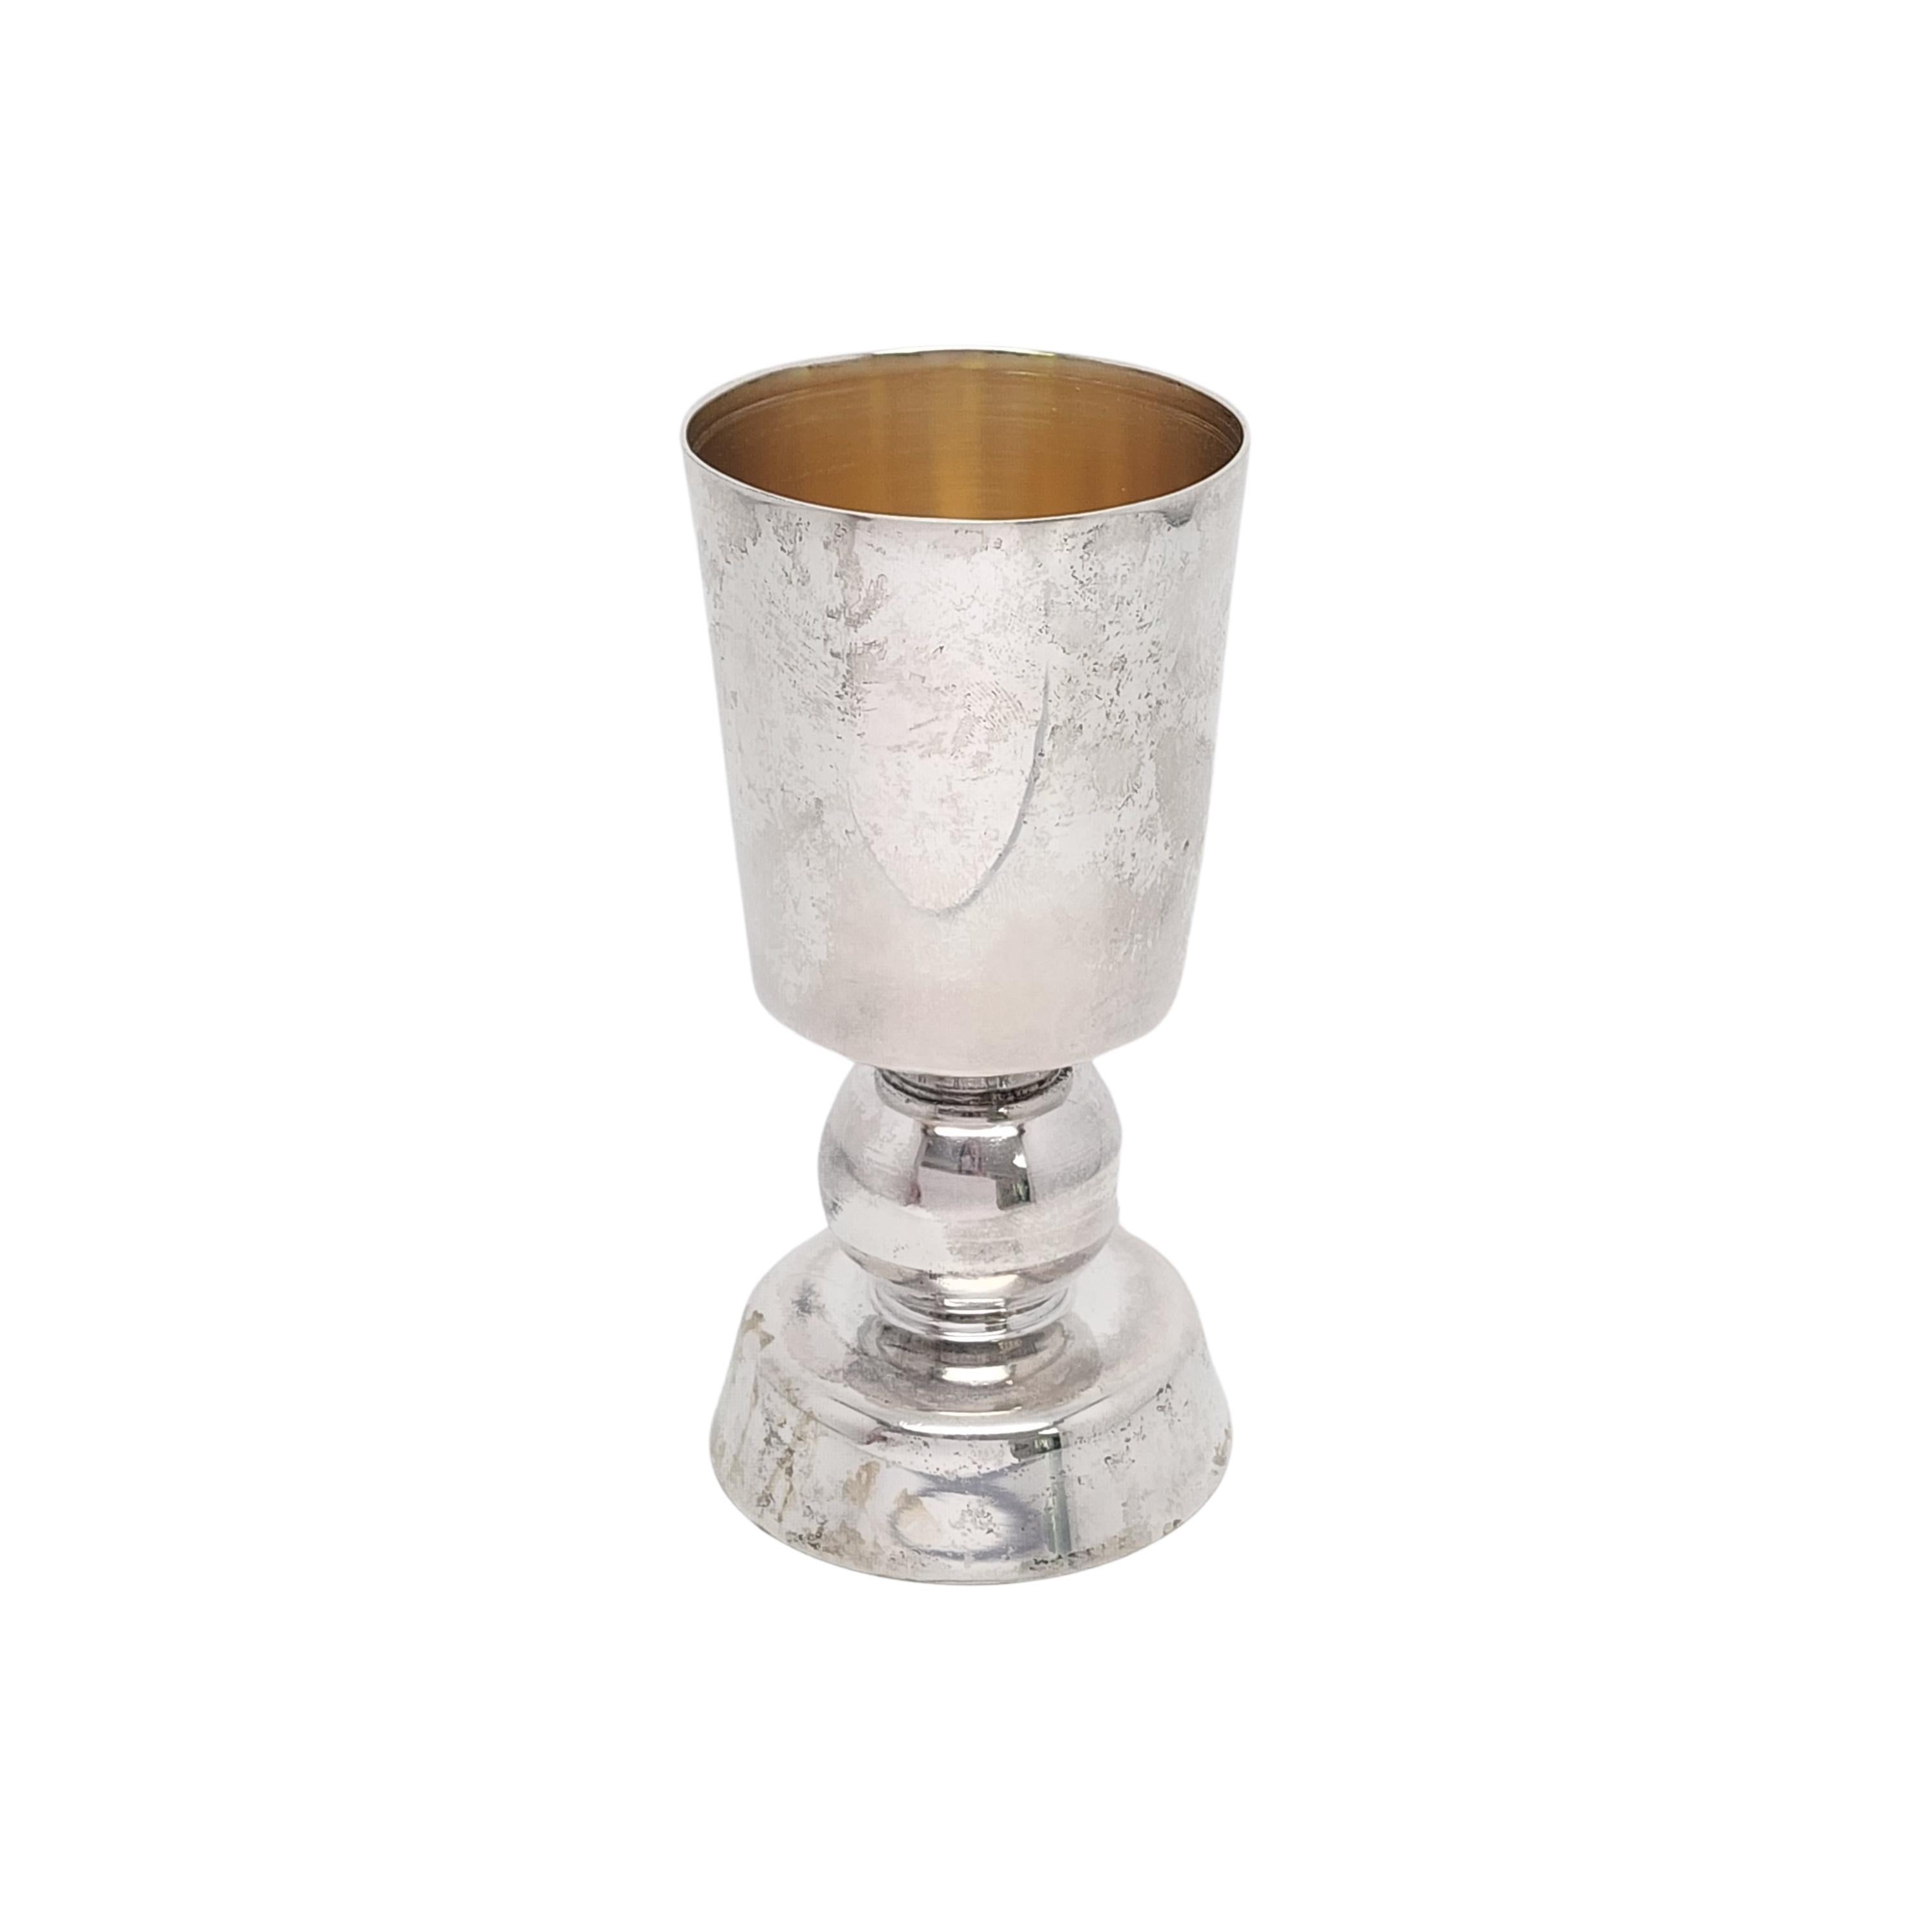 Sterling silver with gold wash interior kiddush cup by Bier Judaica.

A large handmade goblet style kiddush cup with sphere stem by Yitzchak Bier of Bier Judaica.

Measures approx 5 1/8